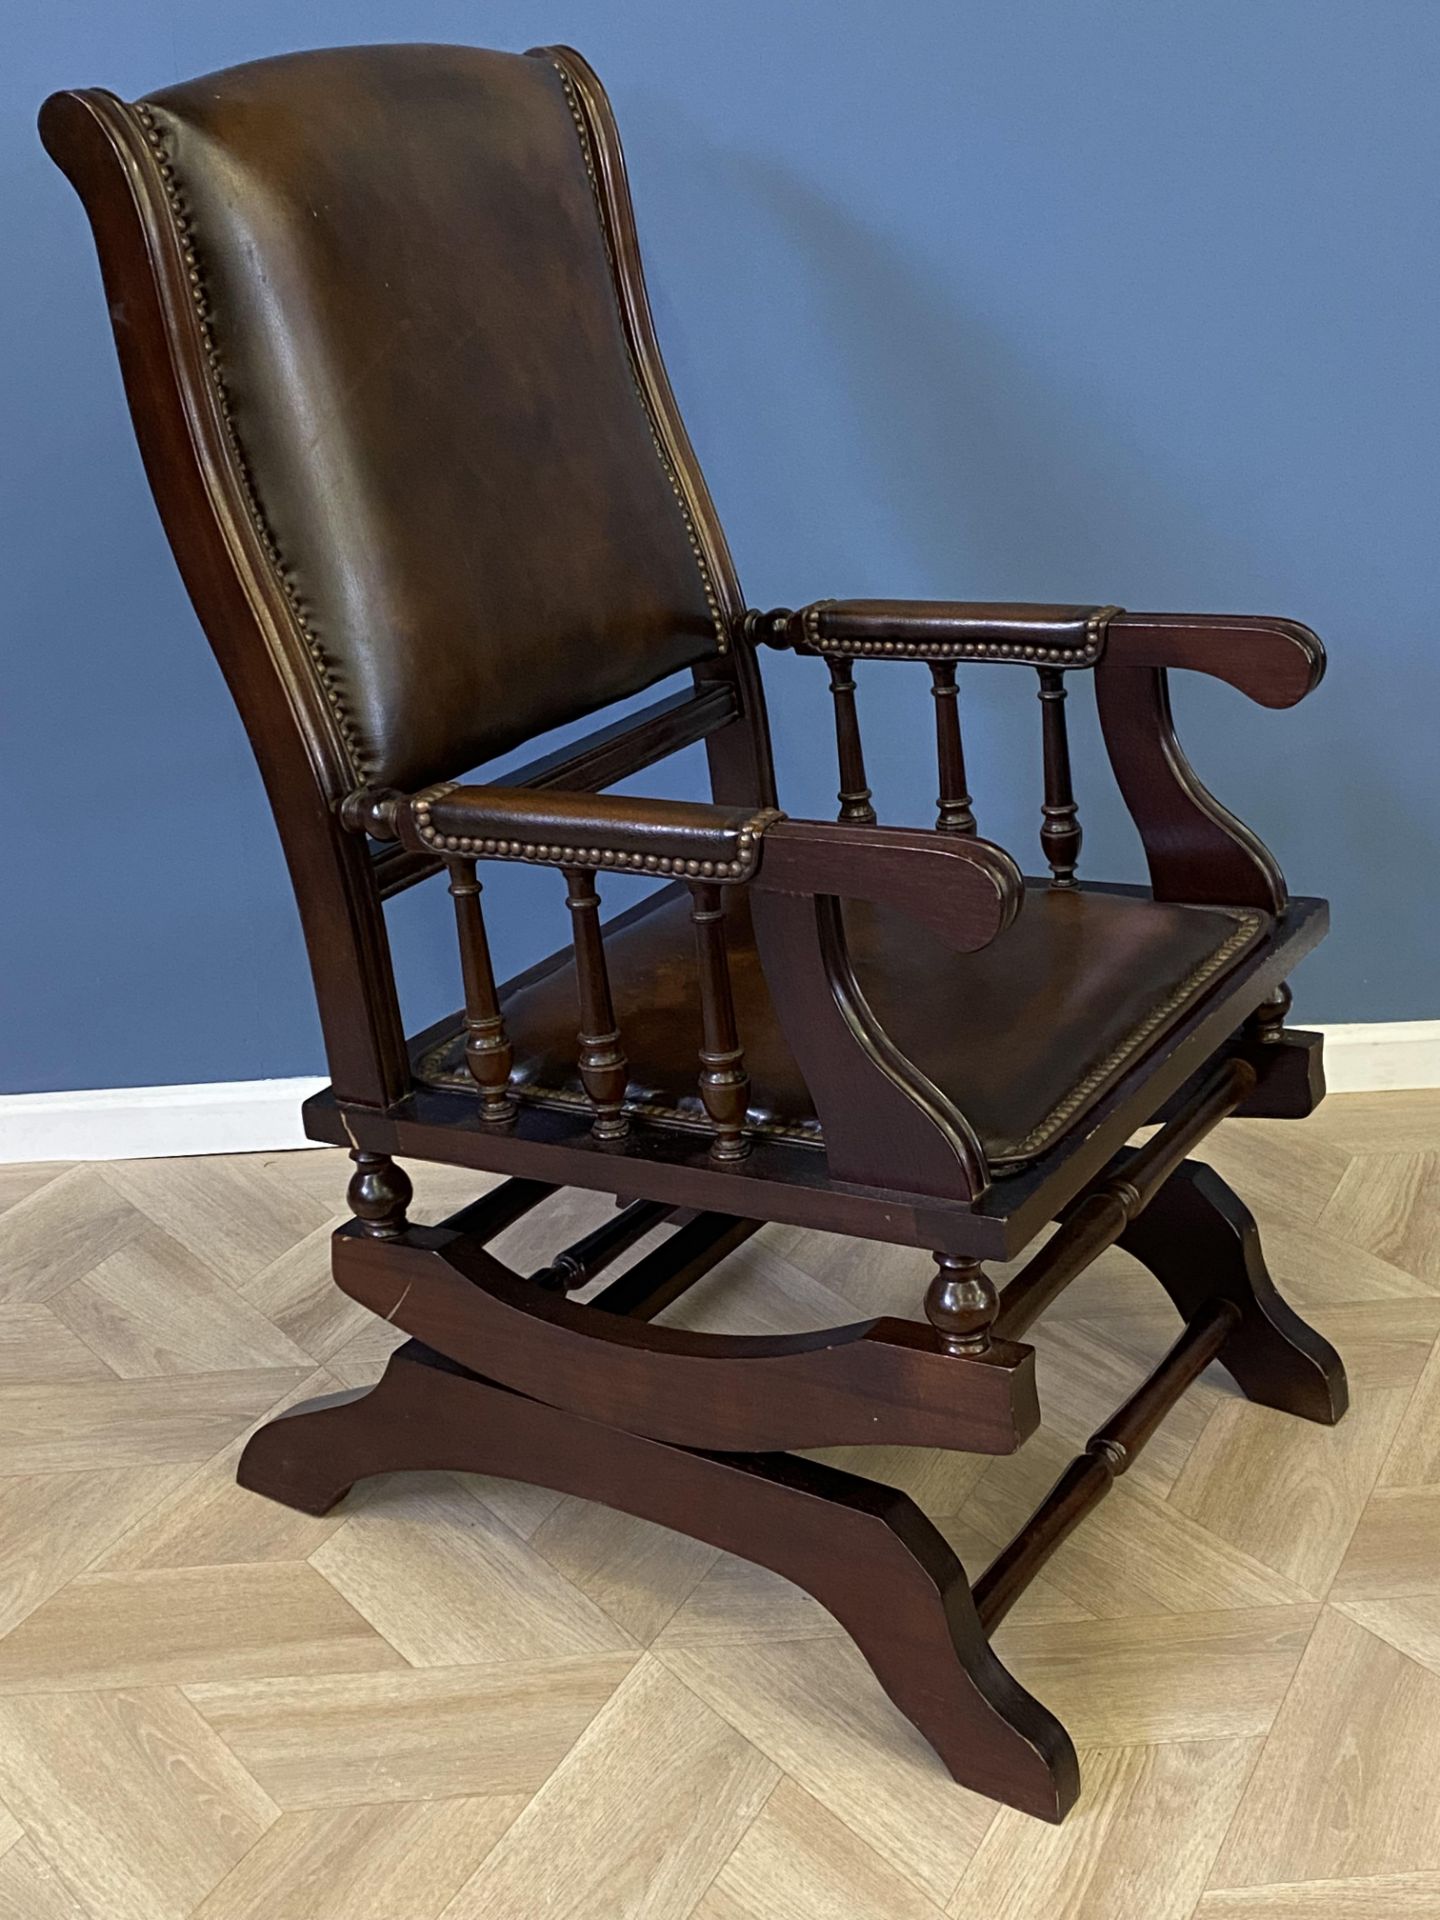 Mahogany framed leather rocking chair - Image 3 of 8